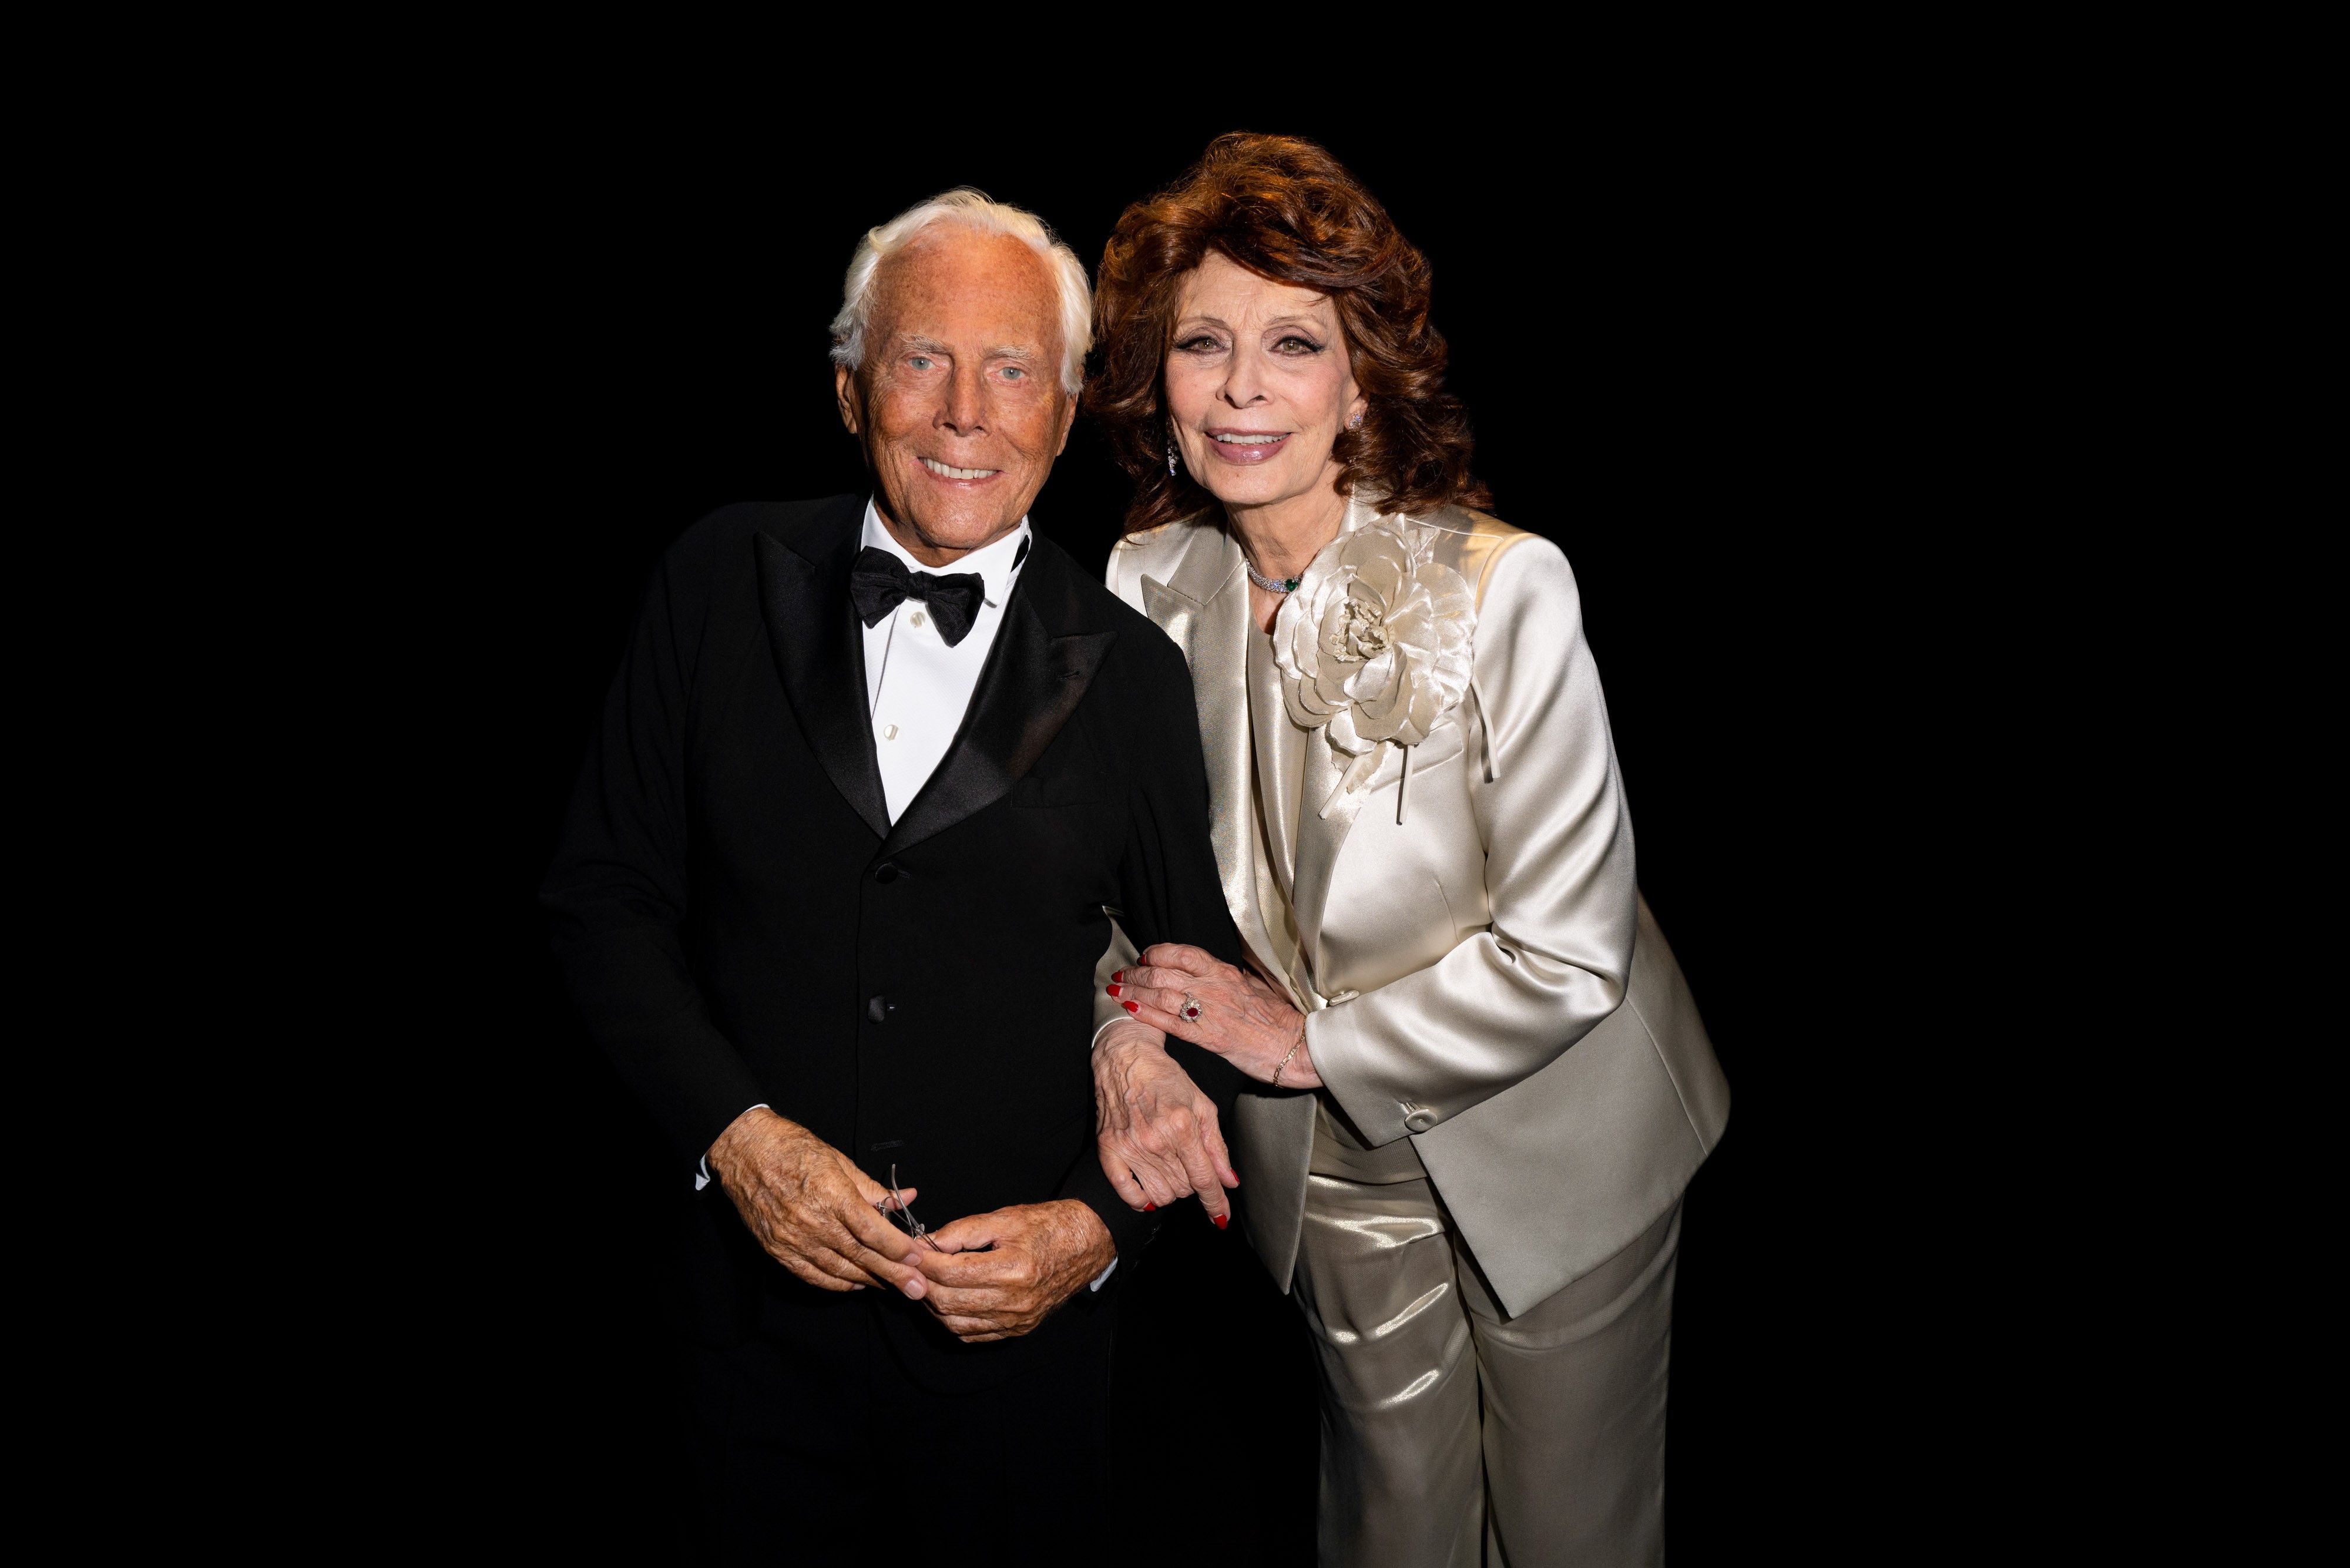 Giorgio Armani's 'One Night Only' star-studded fashion show coincides with  Venice Film Festival - The Economic Times